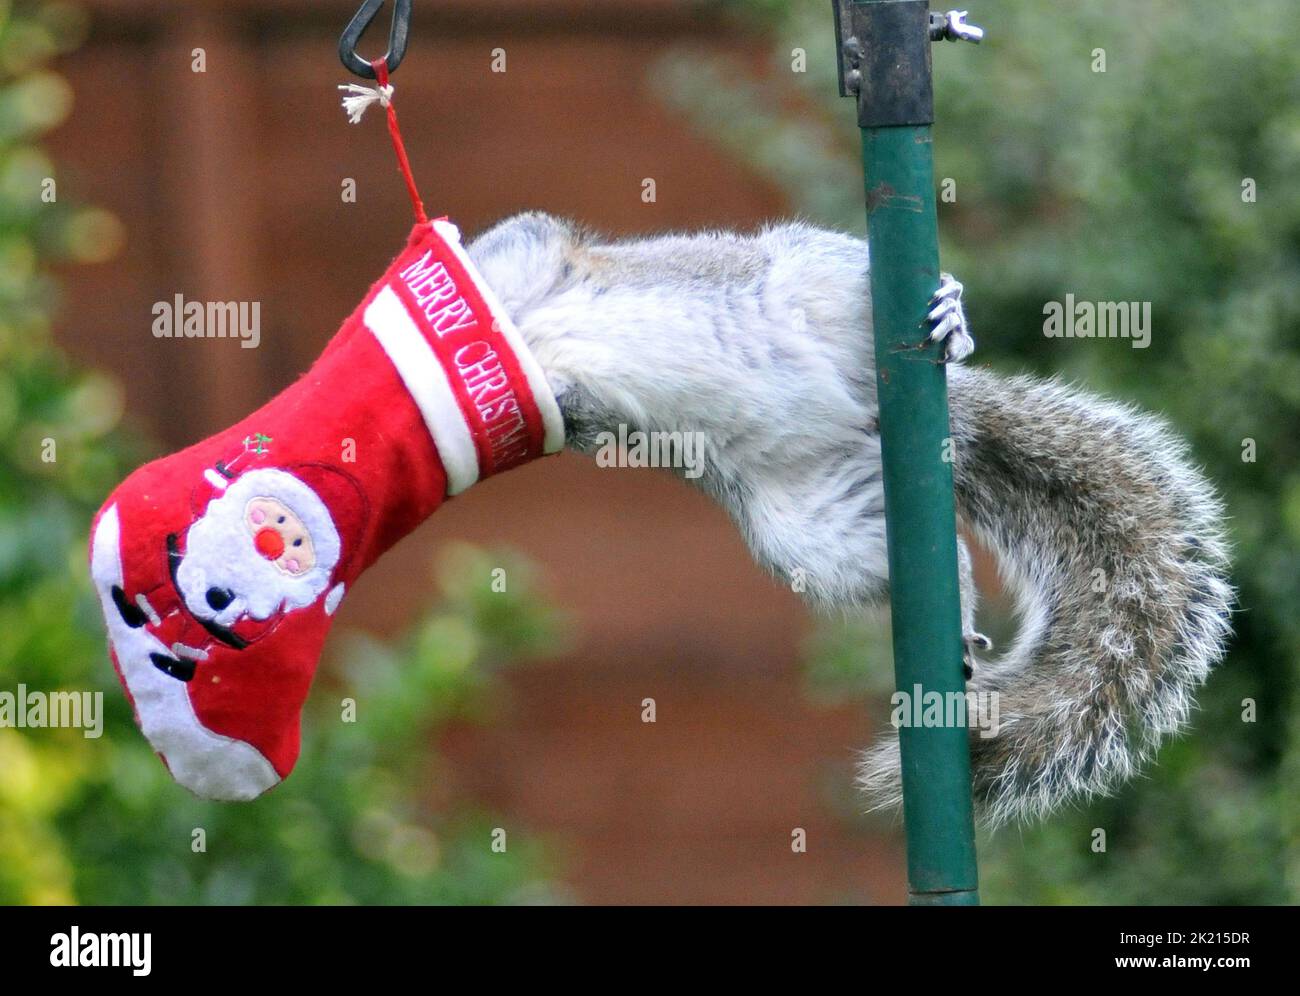 A grey squirrel goes nuts for the treats in his Christmas stocking which has been hung out on the bird feeder of nature lover Sue Perring from Purbrook in Hampshire.  Although the goodies are not easy to get at this resourceful rodent grapples with the swinging stocking until it finally manages to get his head inside to get his present... juicy nuts covered in peanut butter.  39 year old Tax consultant Sue, who feeds the birds and squirrels all year round said :''I thought I would  have a bit of fun with the pesky little creatures by hiding some special treats of walnuts and hazel nuts coated Stock Photo